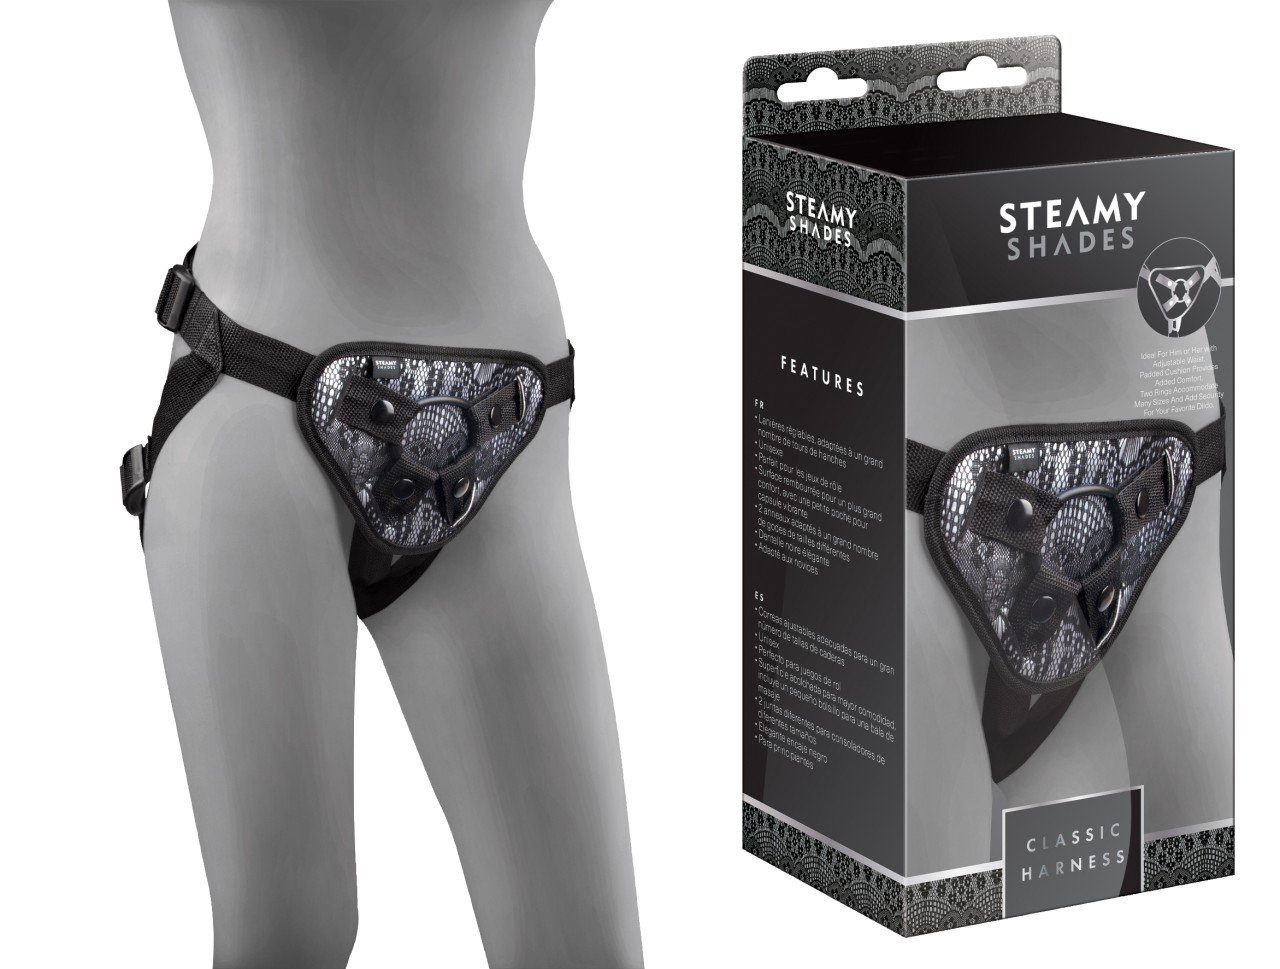 STEAMY SHADES Strap-on-Dildo Classic Harness STEAMY SHADES